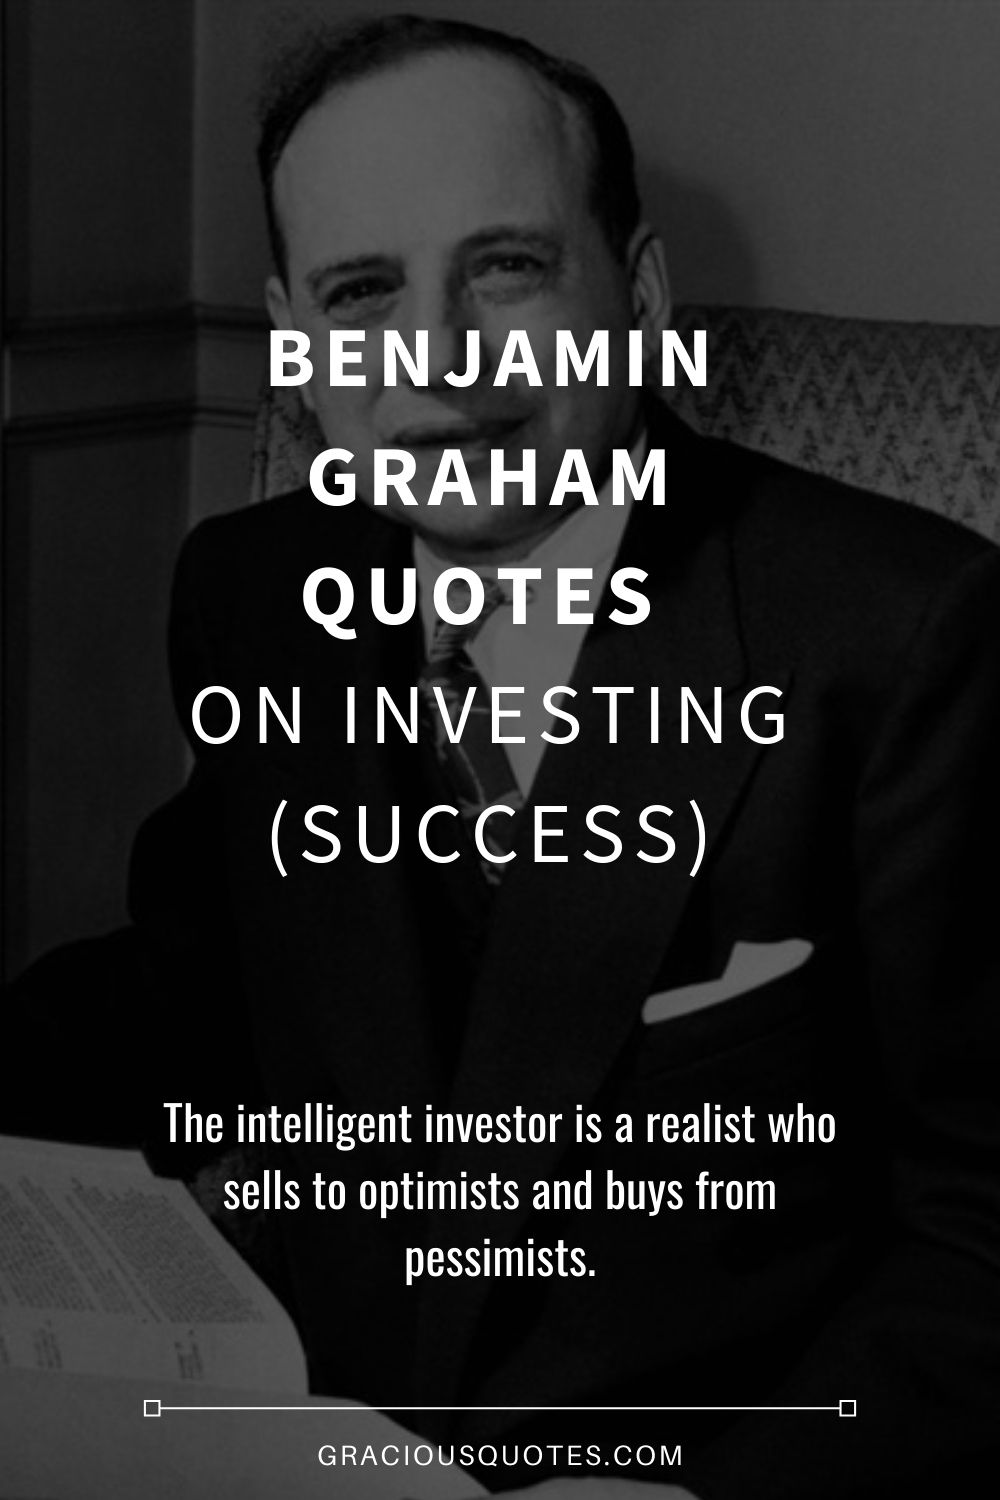 Value Investing: Try This Benjamin Graham Style Strategy